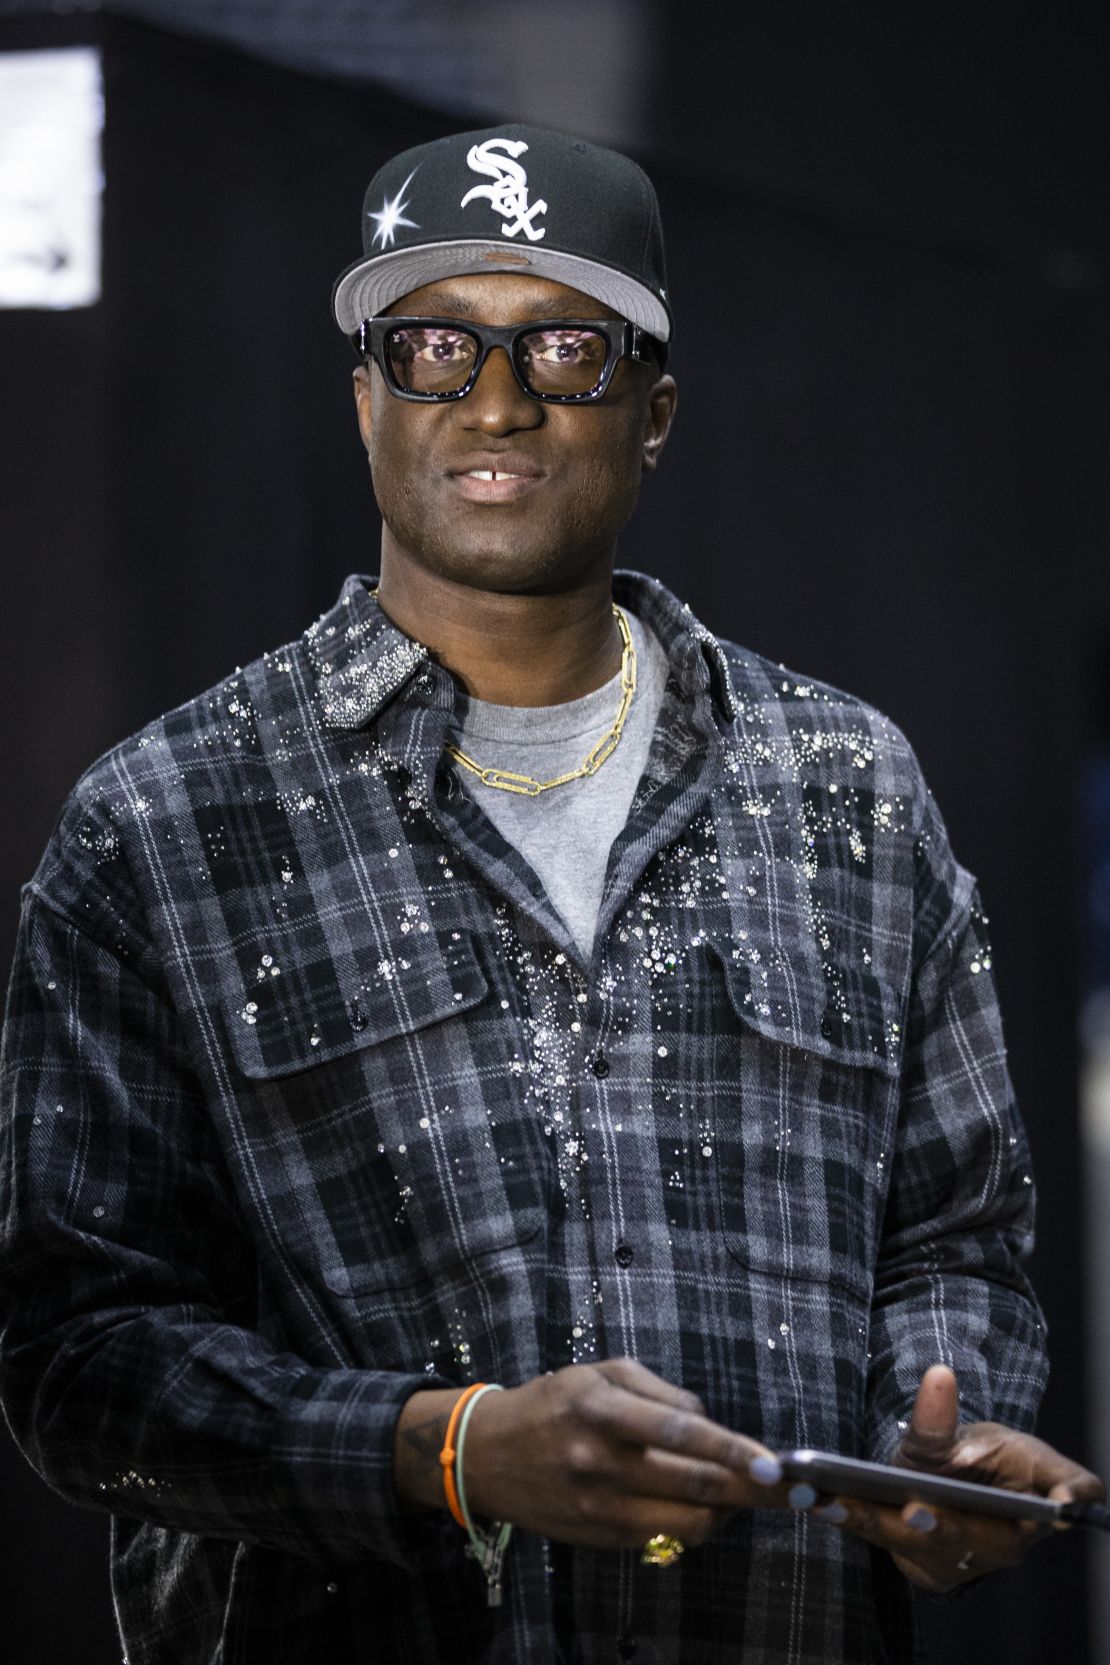 Virgil Abloh backstage before the Off-White Womenswear Fall/Winter 2020/2021 show in Paris